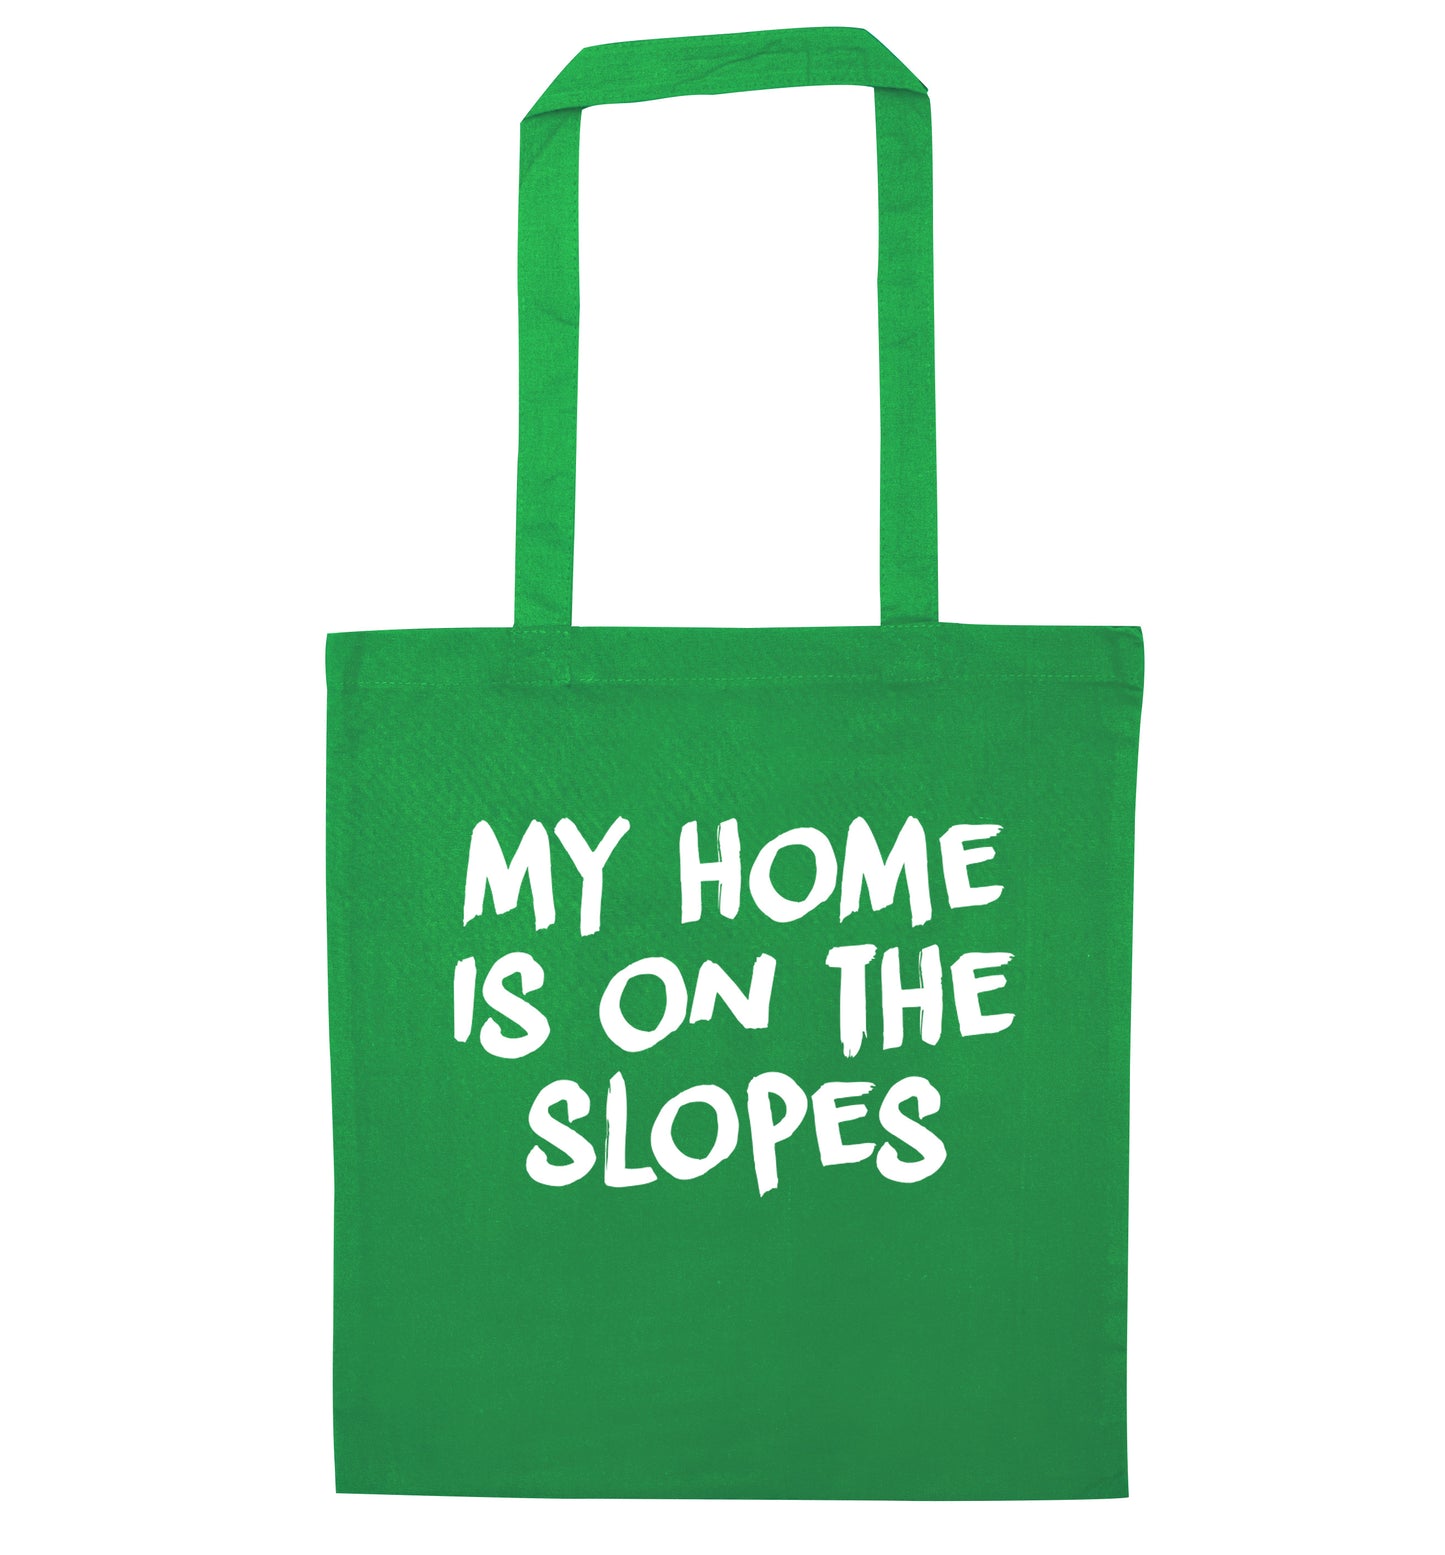 My home is on the slopes green tote bag